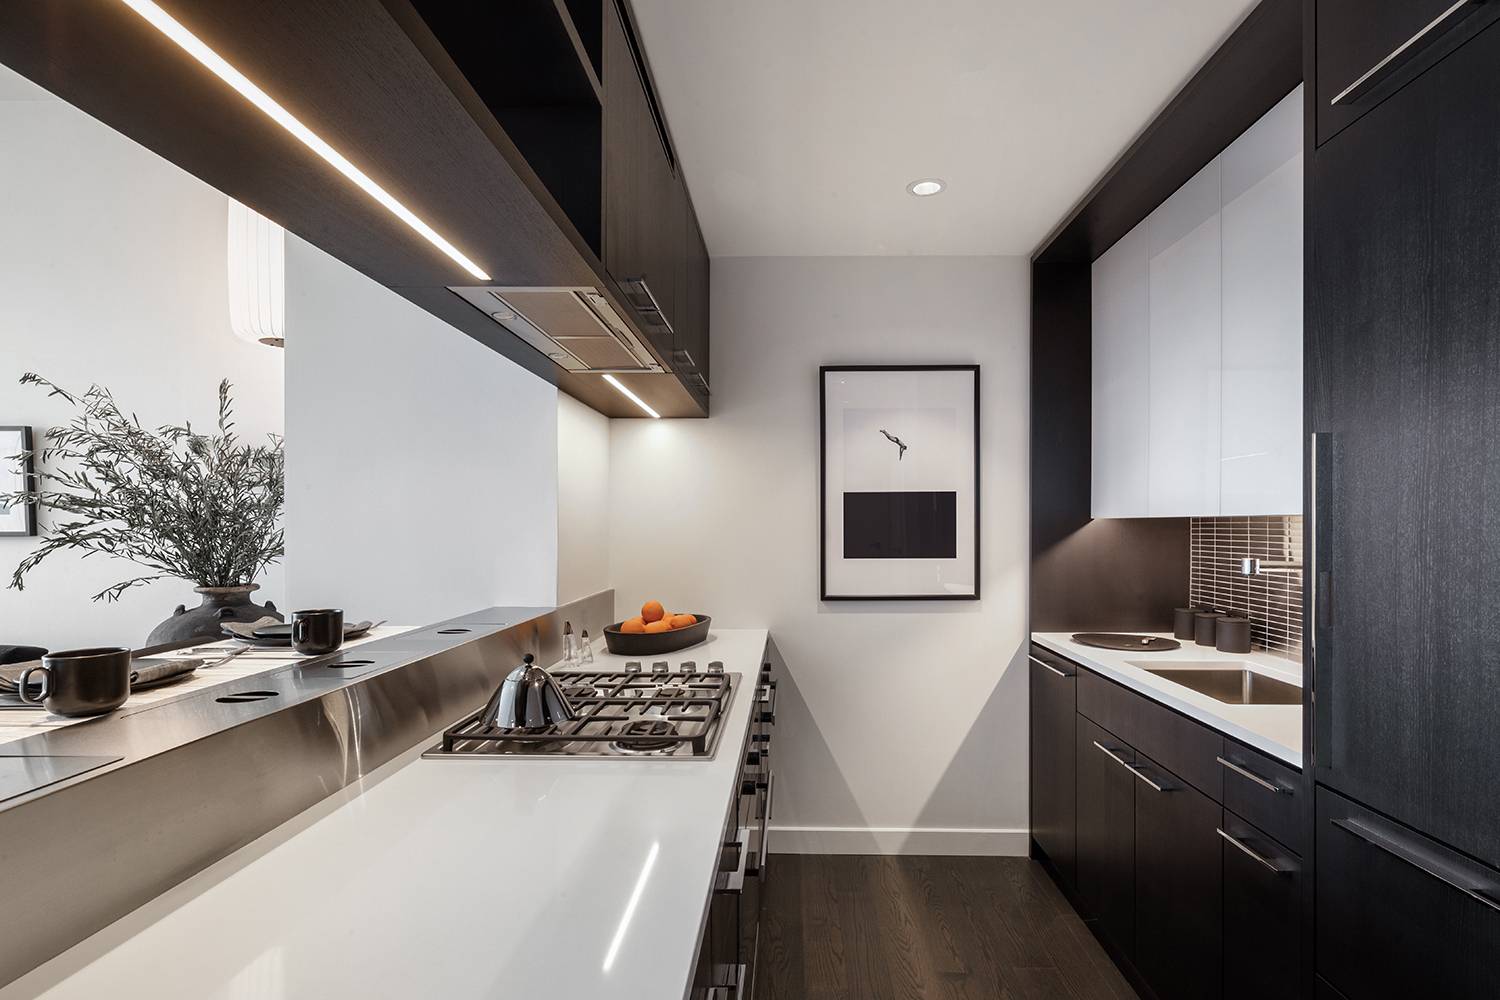 ONE MANHATTAN SQUARE OFFERS ONE OF THE LAST 20 YEAR TAX ABATEMENTS AVAILABLE IN NEW YORK CITY Residence 49N is a 723 square foot one bedroom, one bathroom with an ...